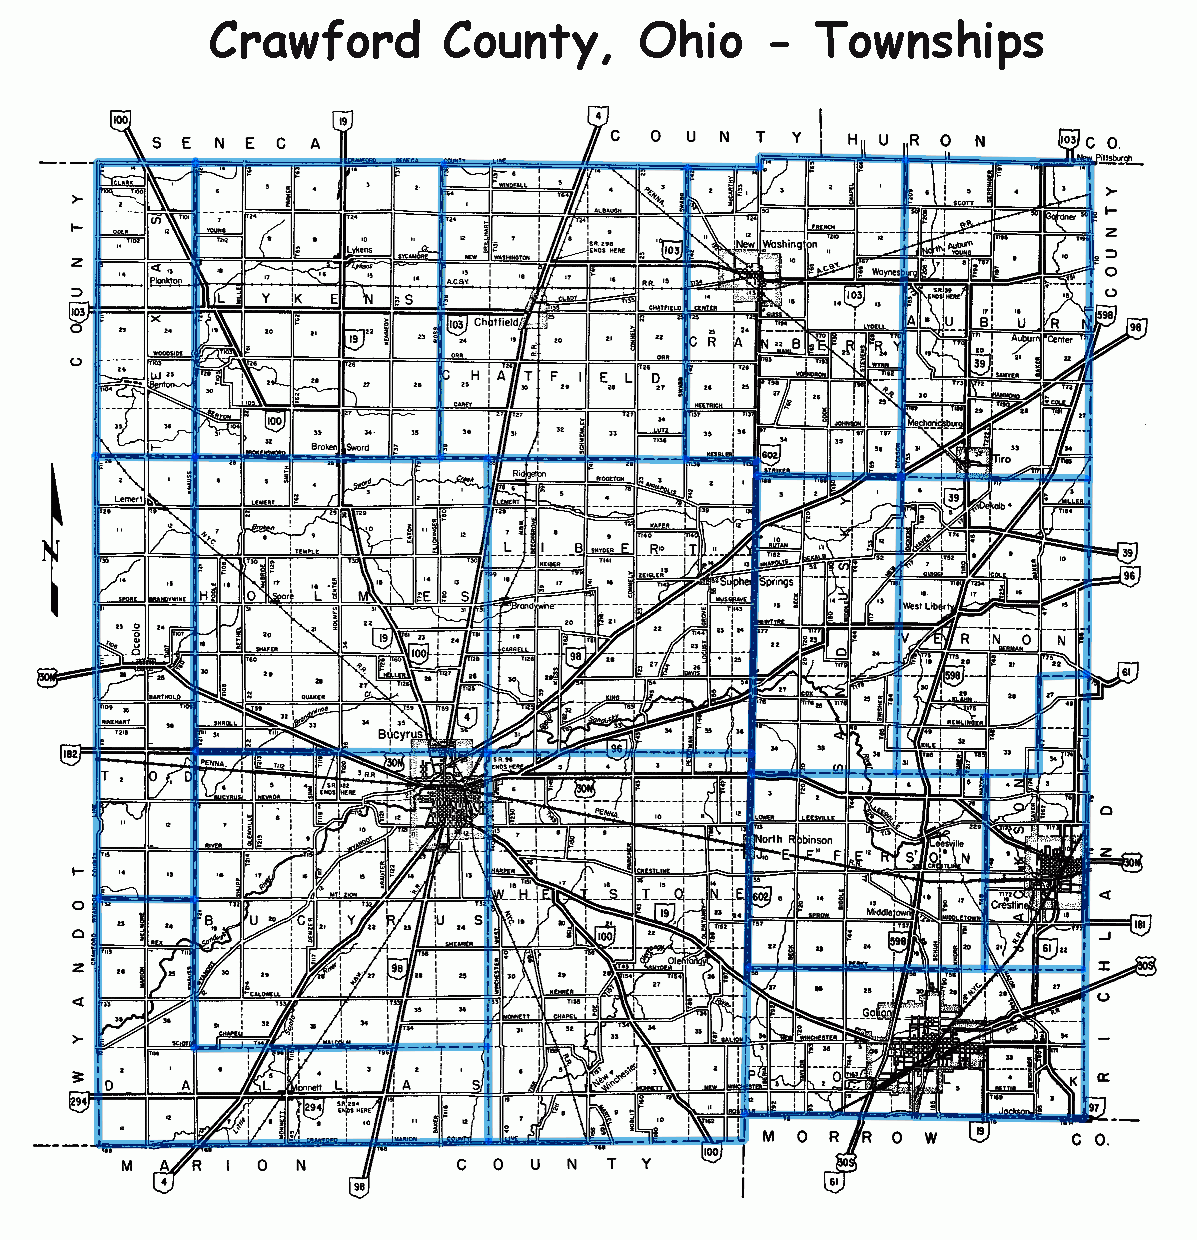 Index Map of the Townships - Crawford County, Ohio